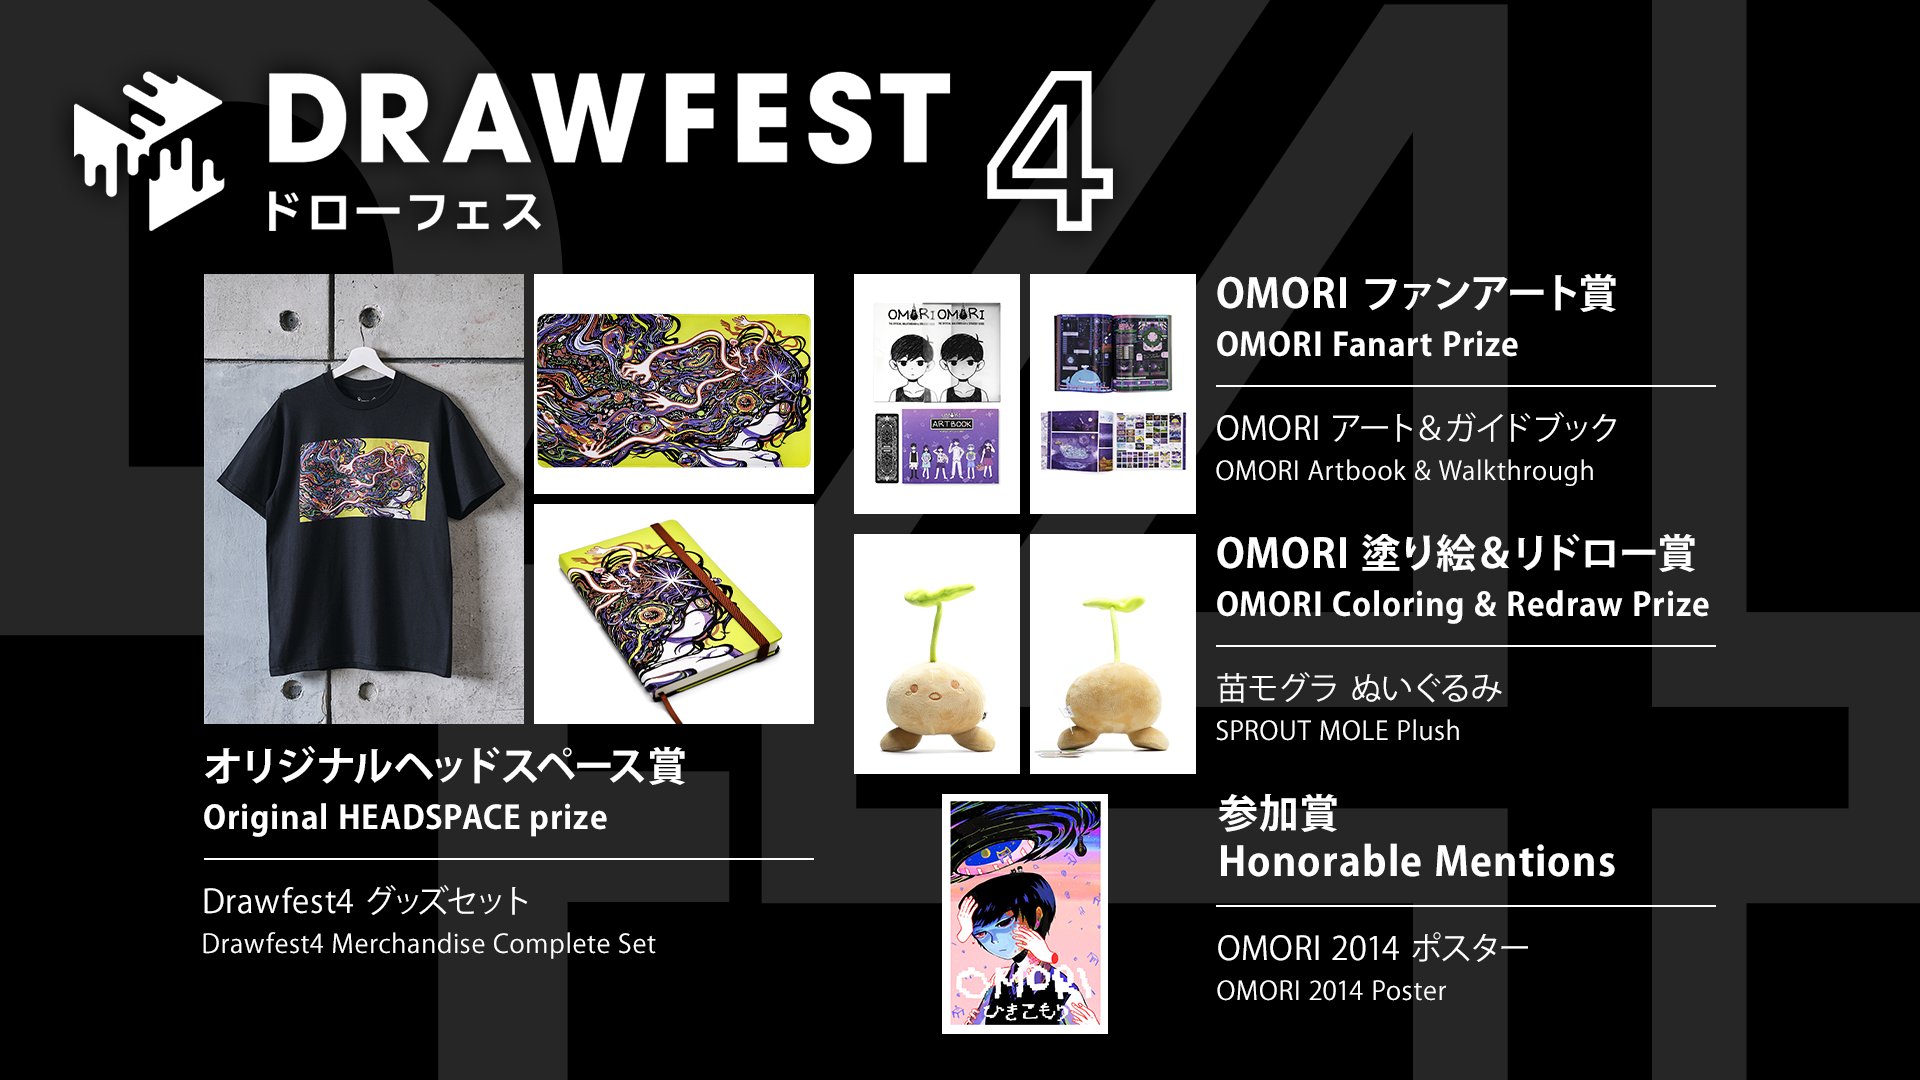 i created the key visual for DRAWFEST 4 and will be participating in  DRAWFEST on 6/10 and 6/17. i'll be talking about the creation of OMORI…